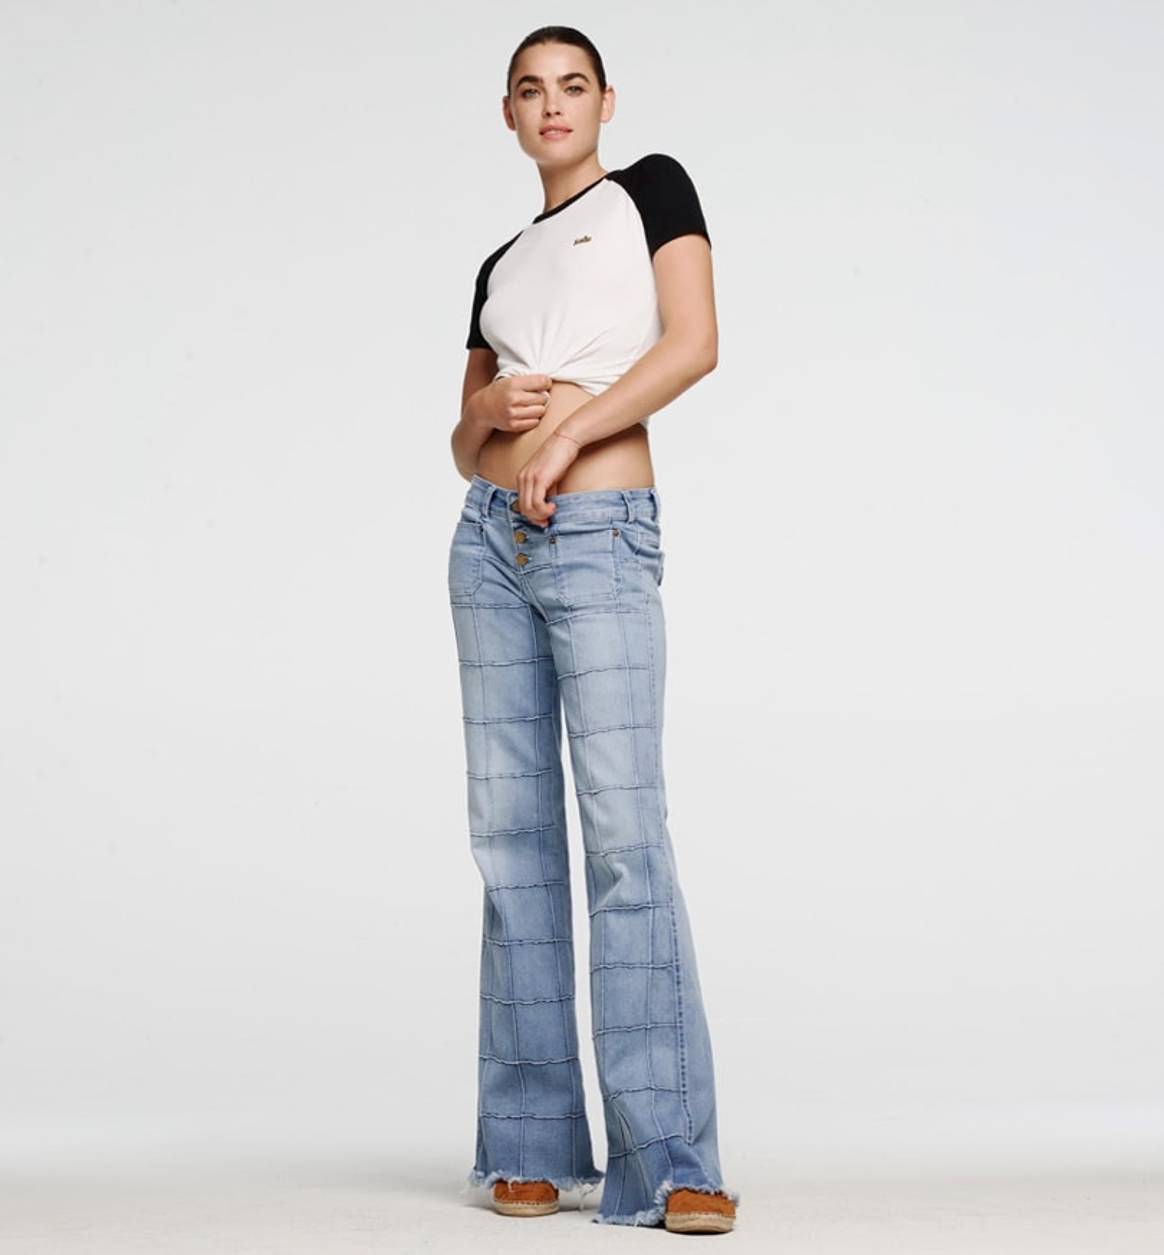 Lois Jeans Magasin - Sample & Stock Sale